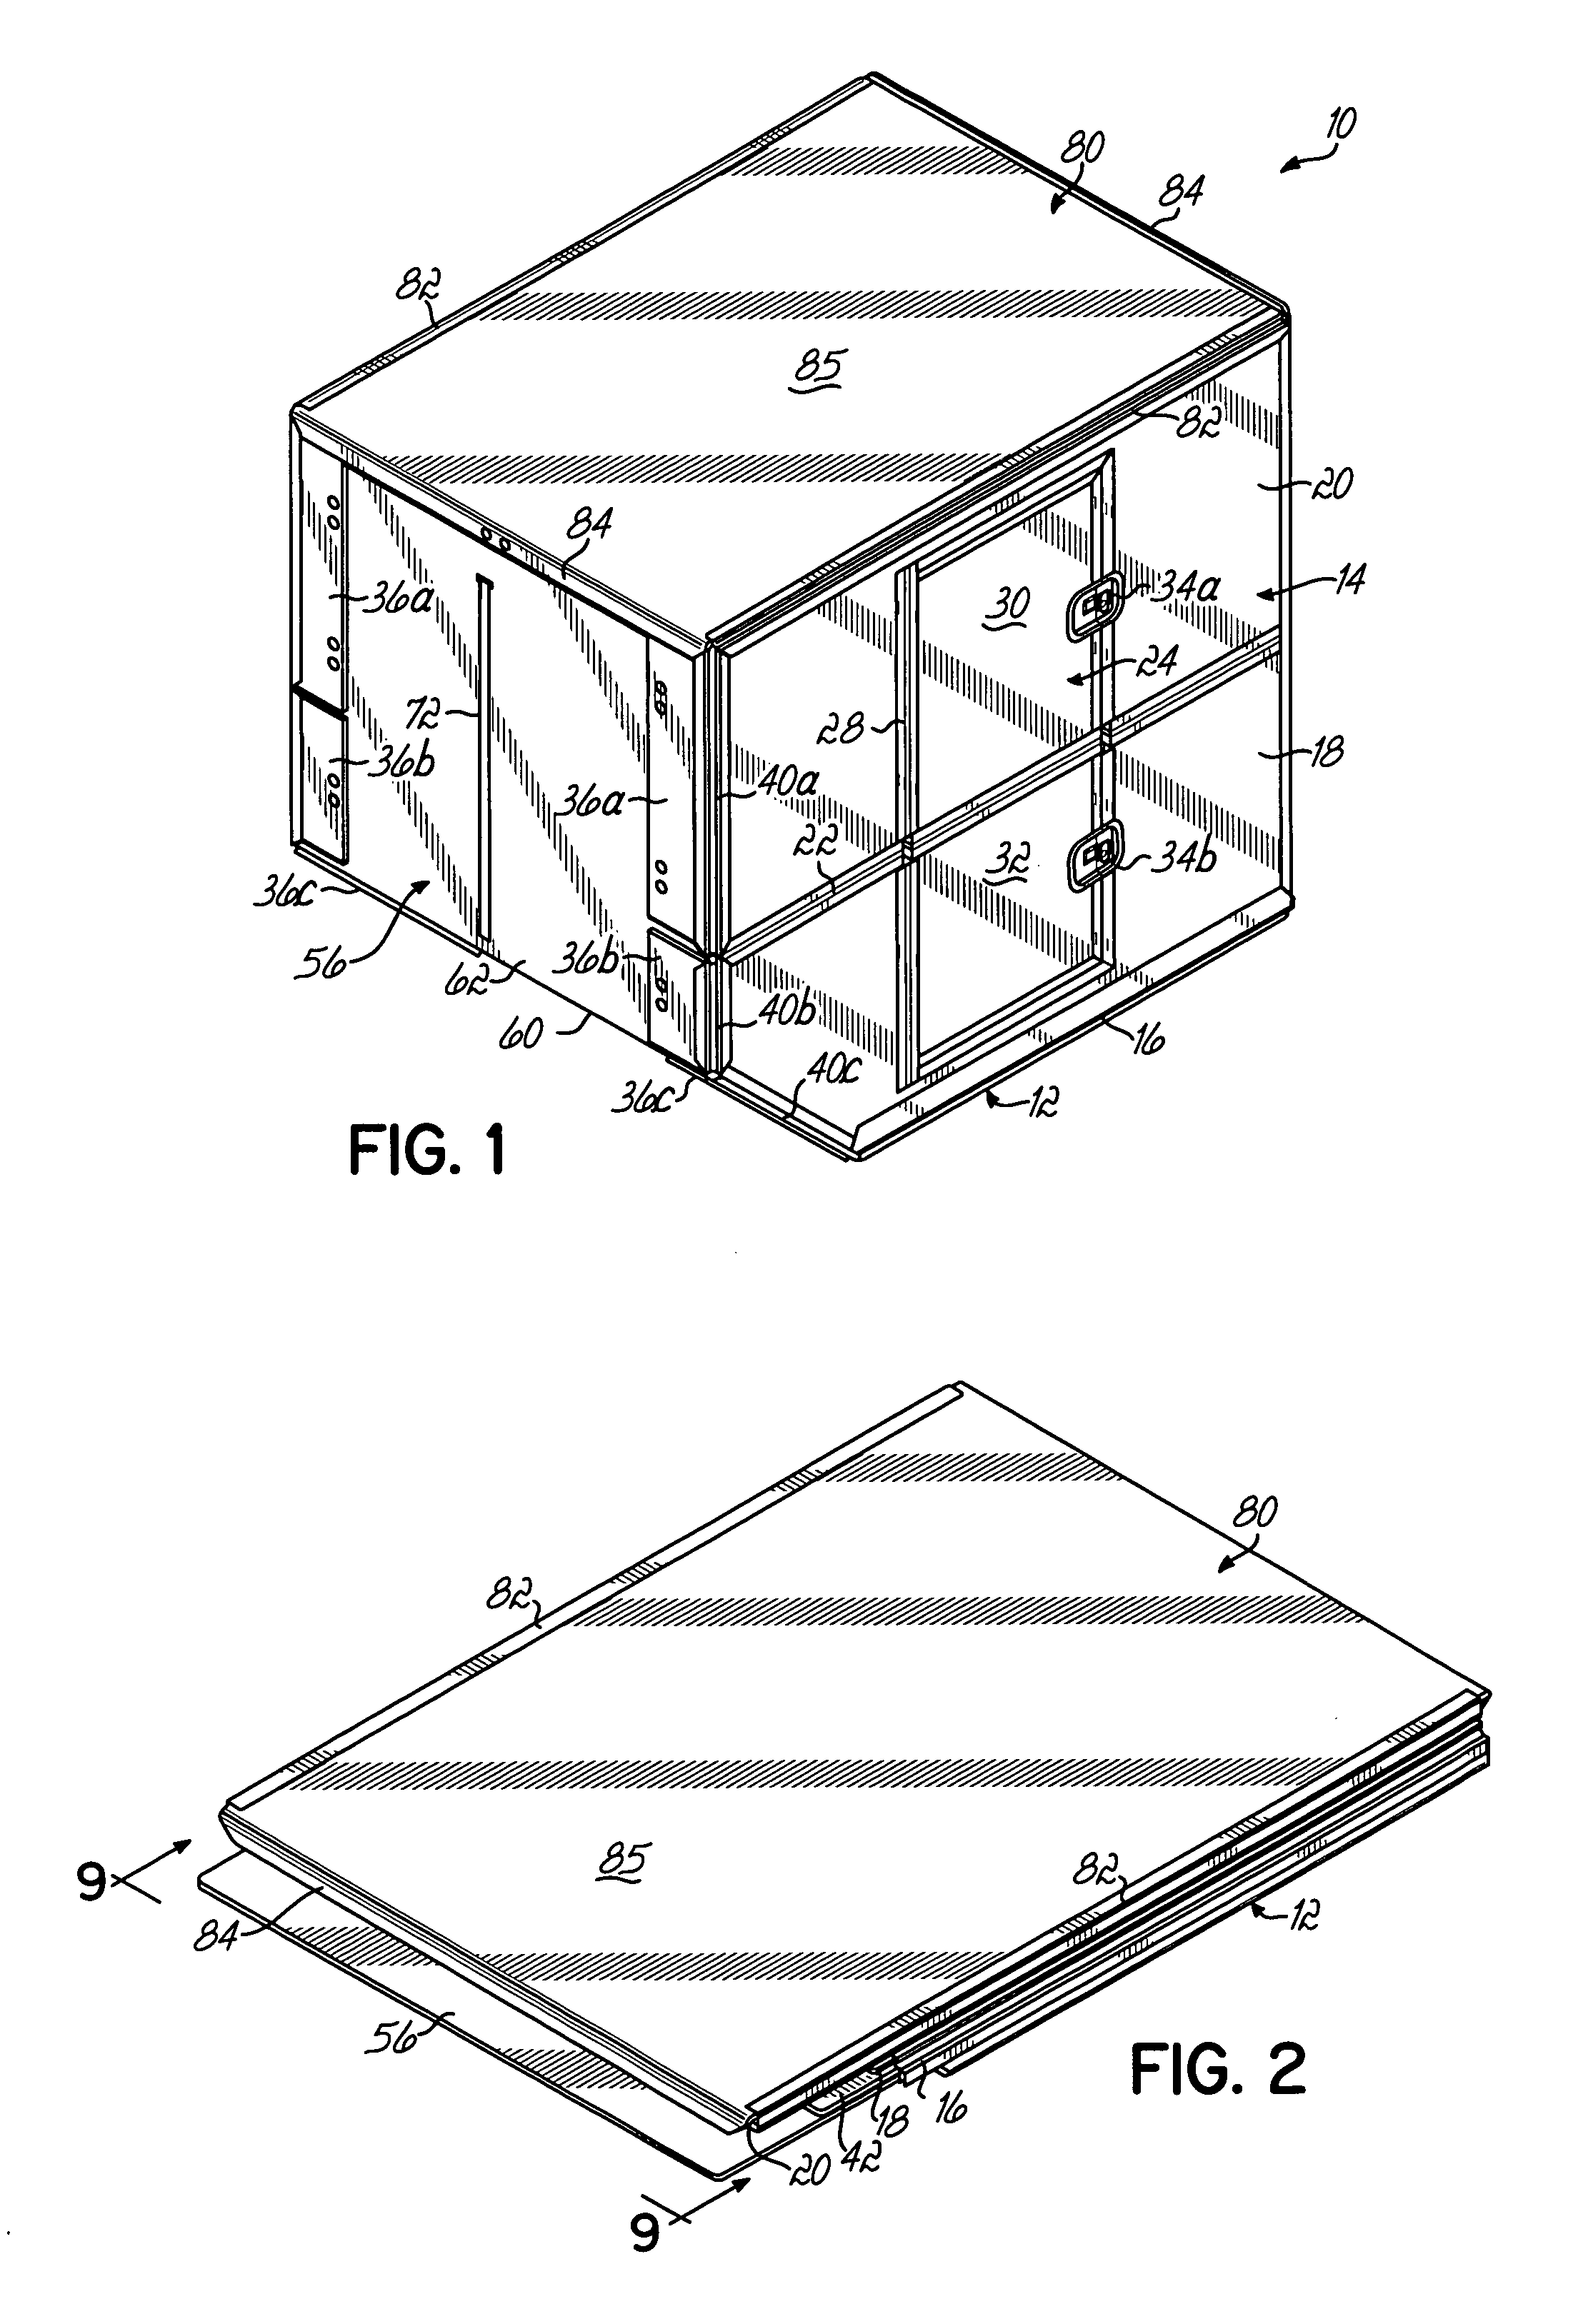 Collapsible container for air shipment cargo and method of use